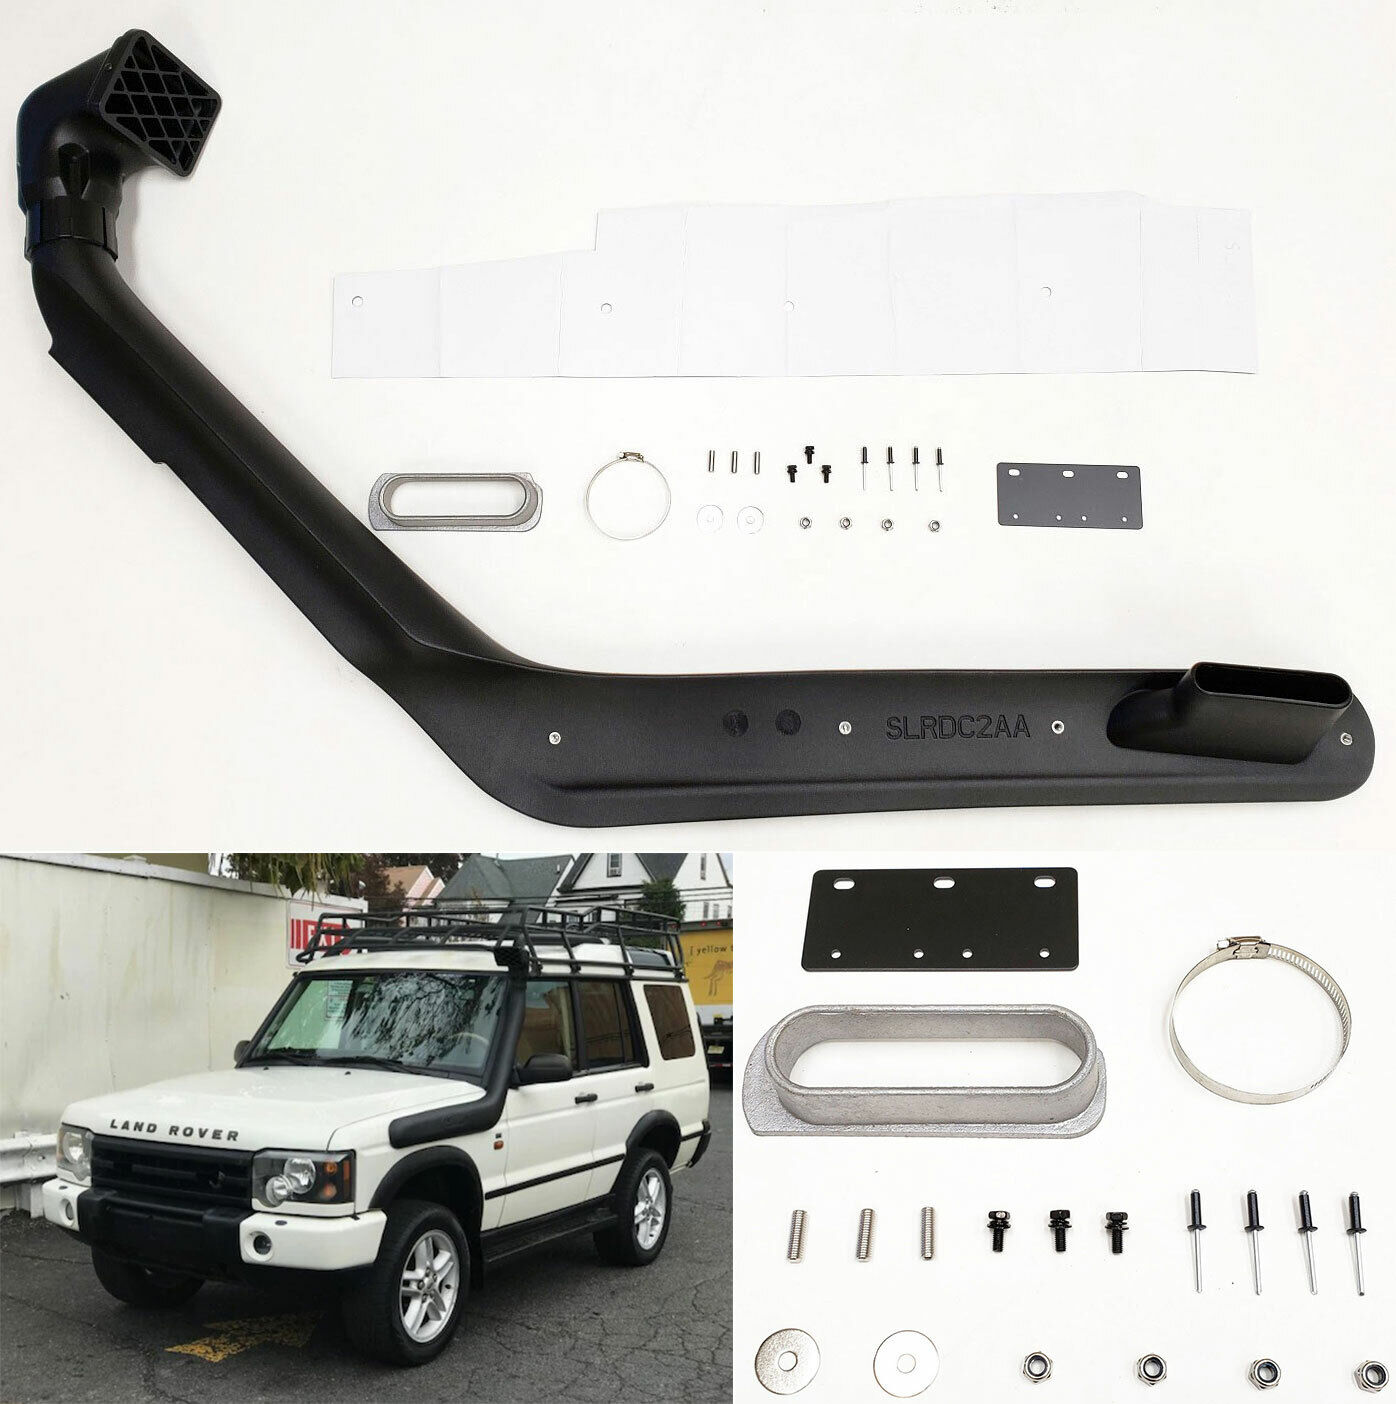 Cold Snorkel Kit Fit 99-04 Land Rover Discovery 2 4.0 4.6 V8 Ram System 4X4